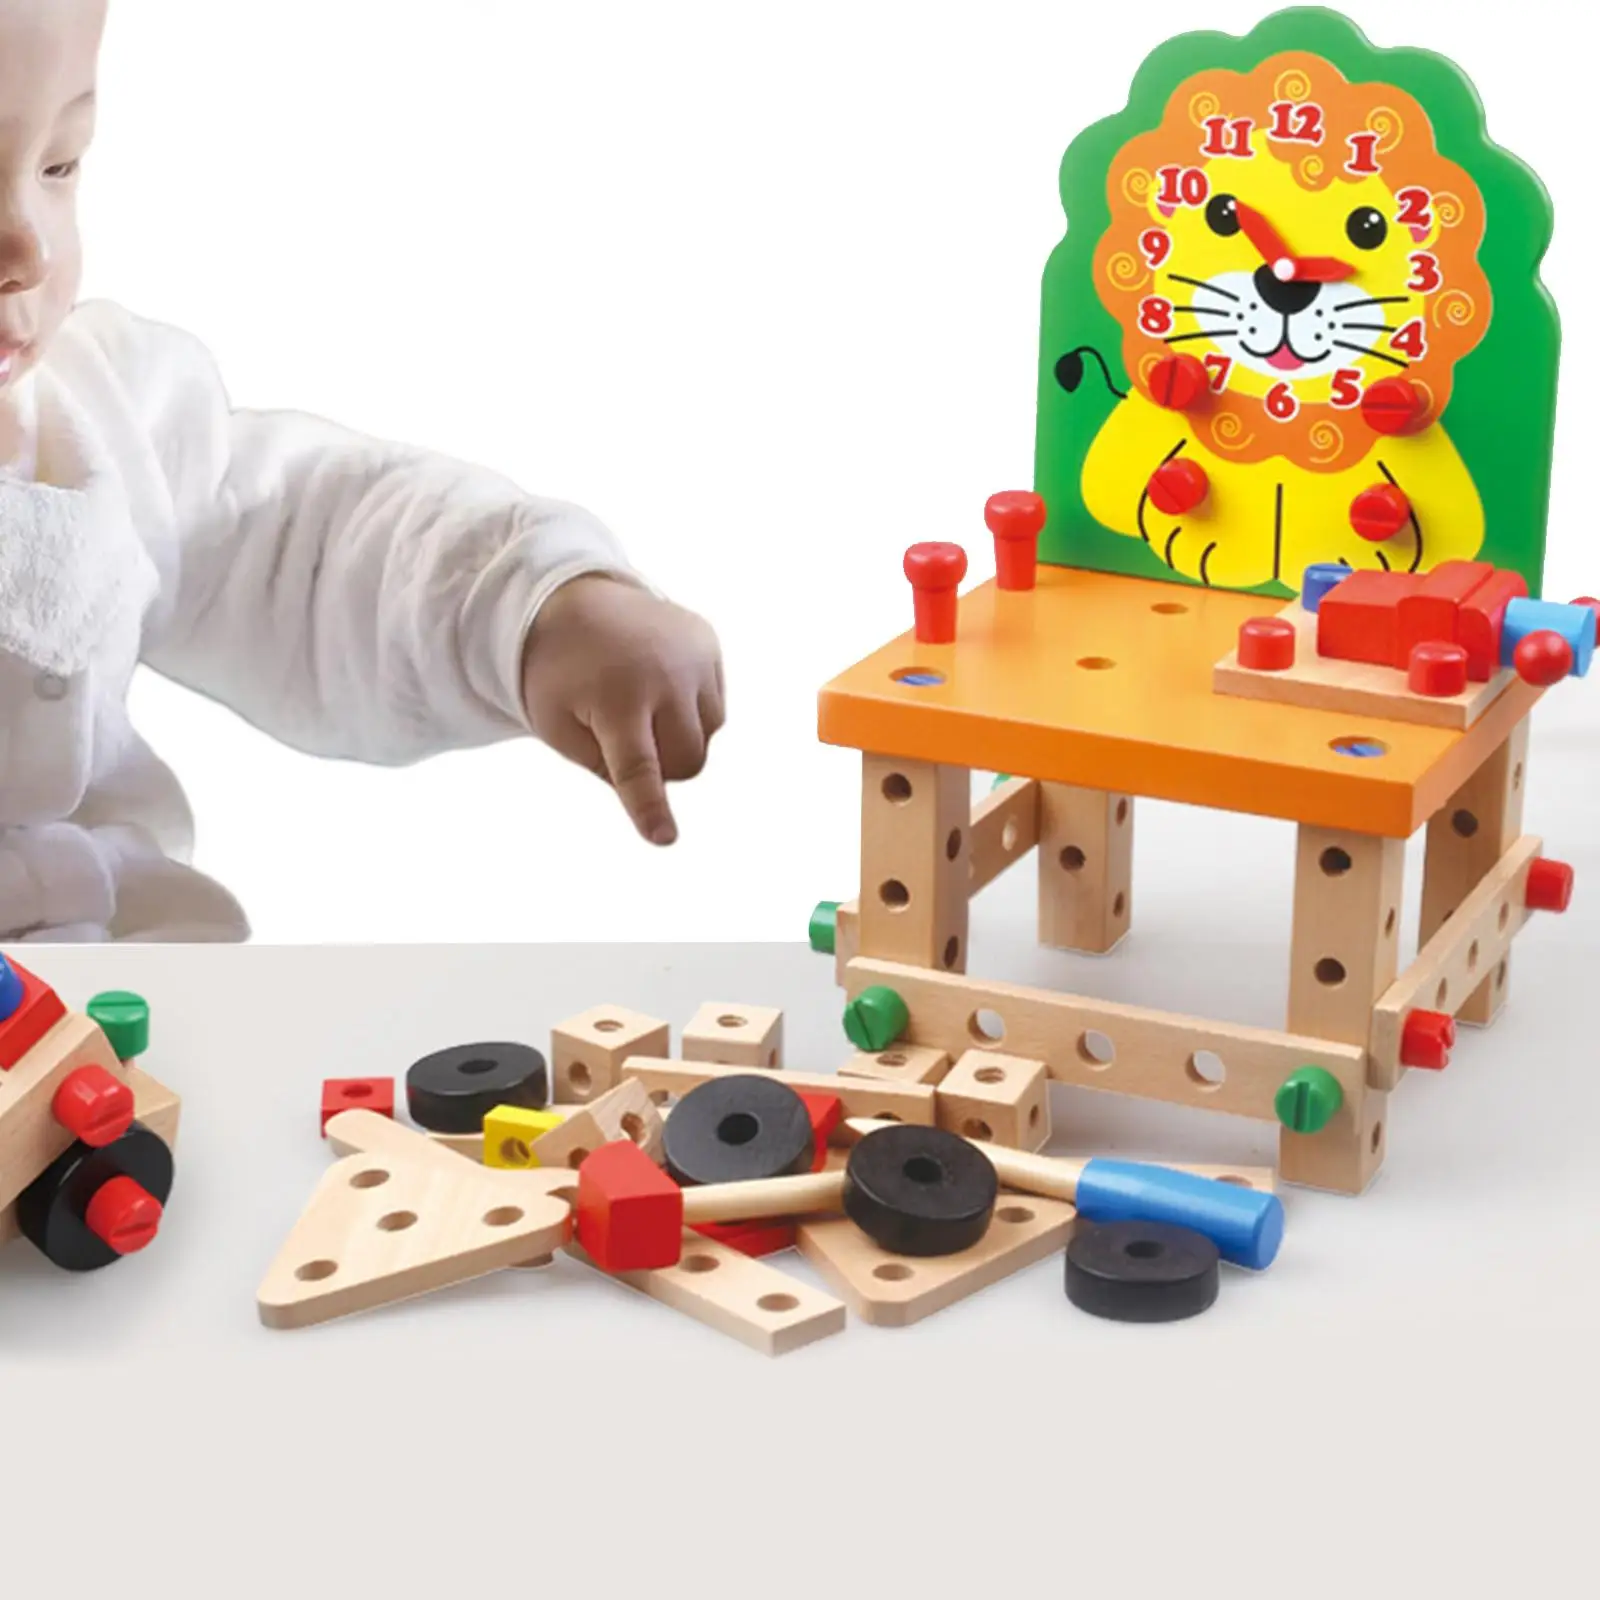 Wooden Chair Models Construction Play Set Nuts and Bolts Toy with Tools Kids Wooden Project Woodworking Kit for Children Gifts